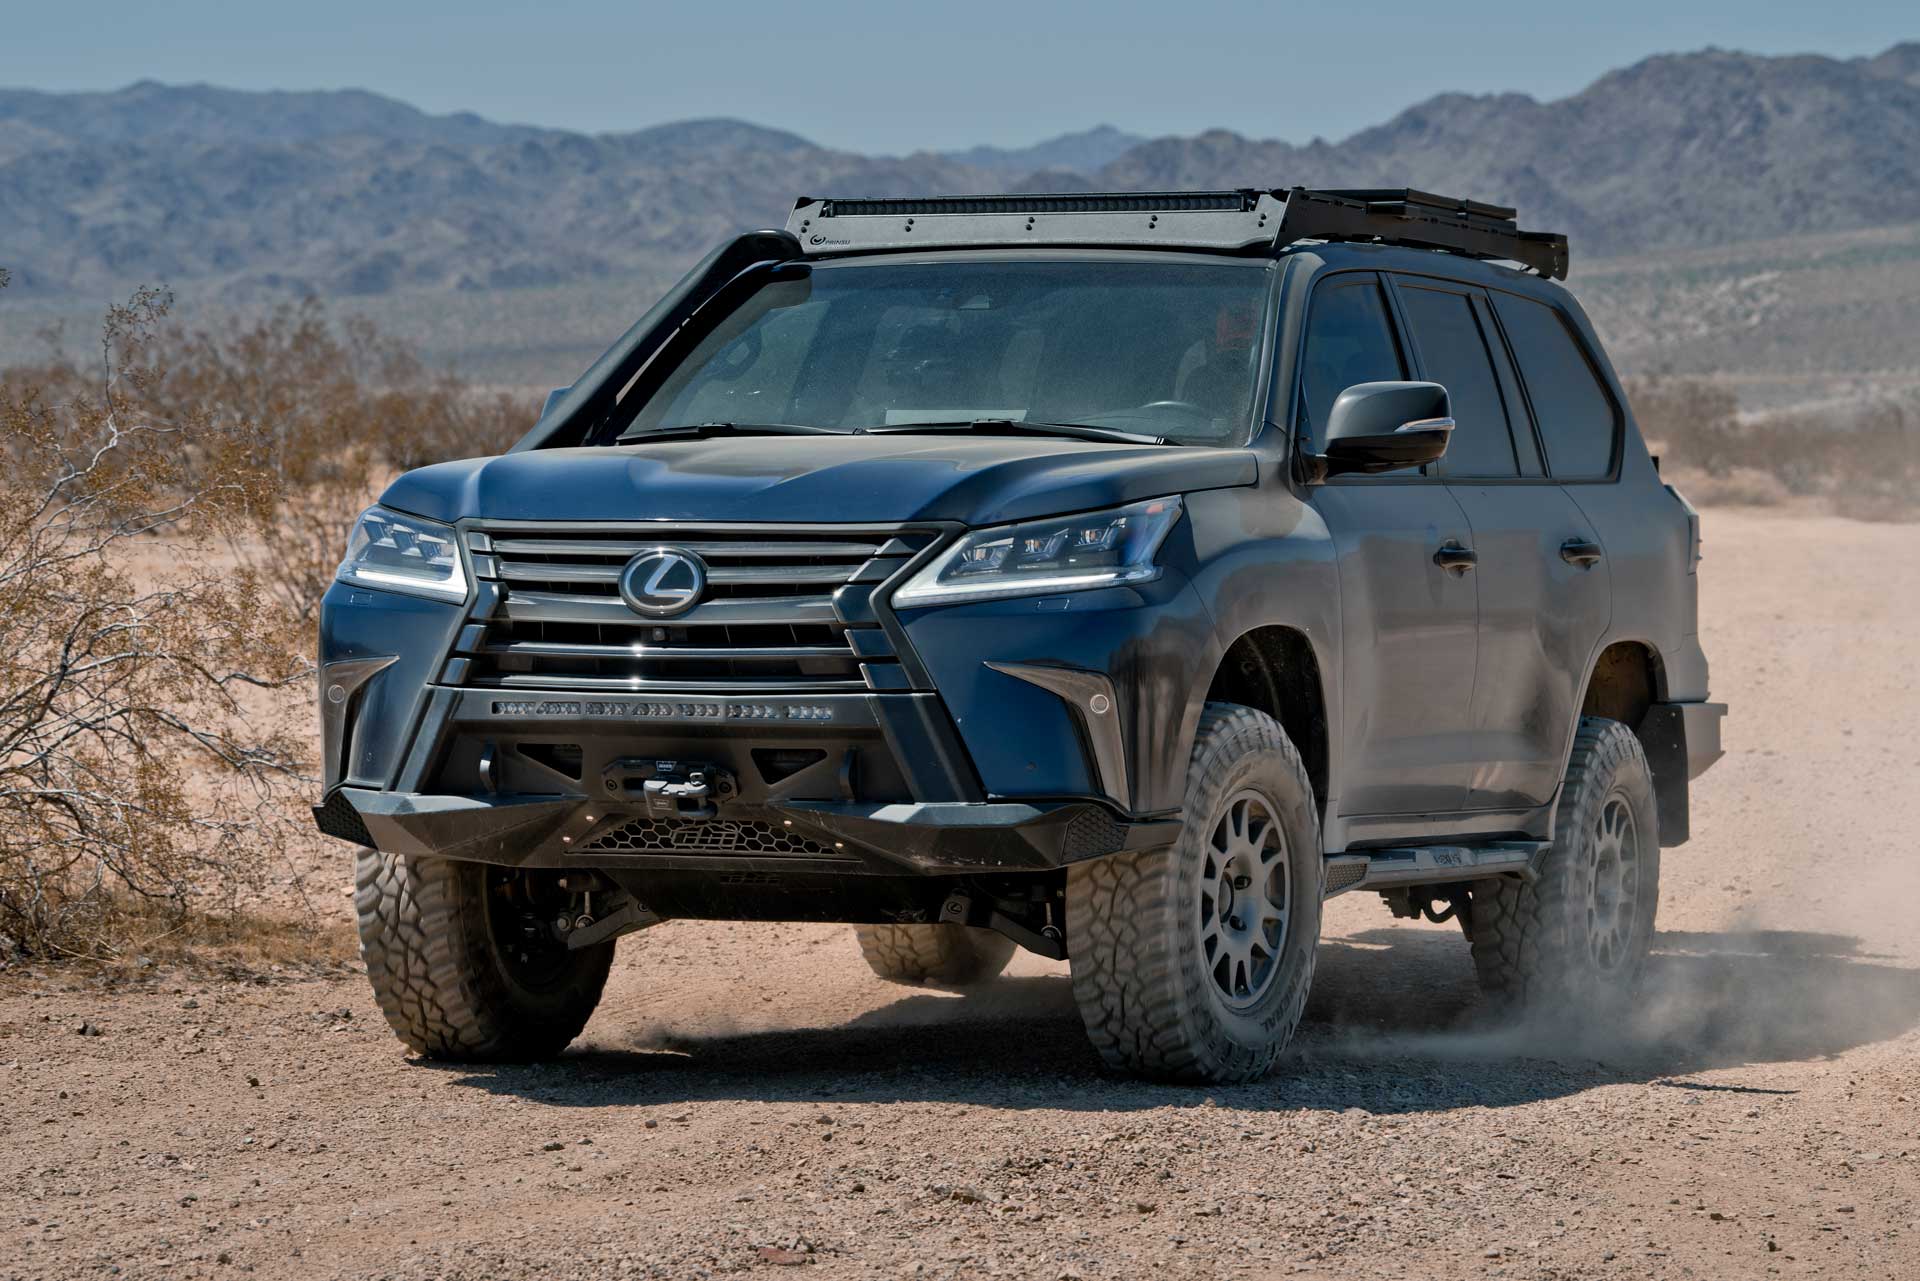 The Lexus J201 Overland Concept is both Beauty and Beast 